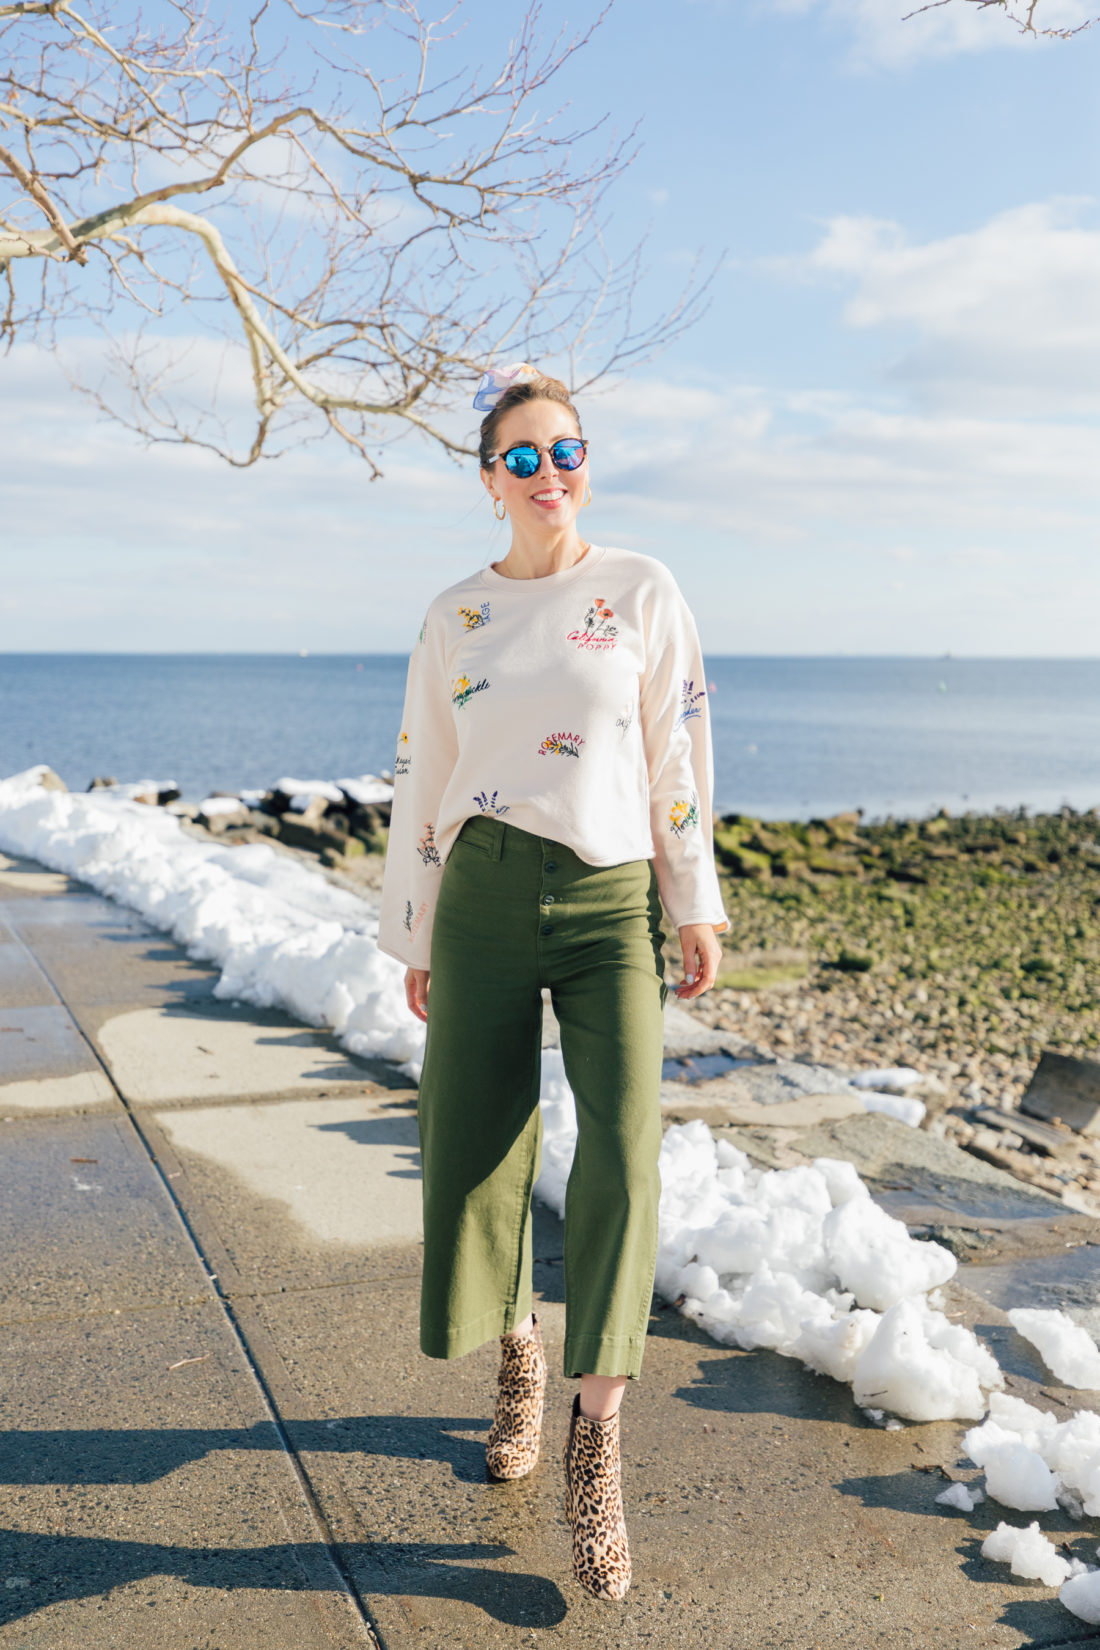 Eva Amurri Martino of Happily Eva After wears a kerchief bun in her hair and shares her favorite sunglasses for spring 2019